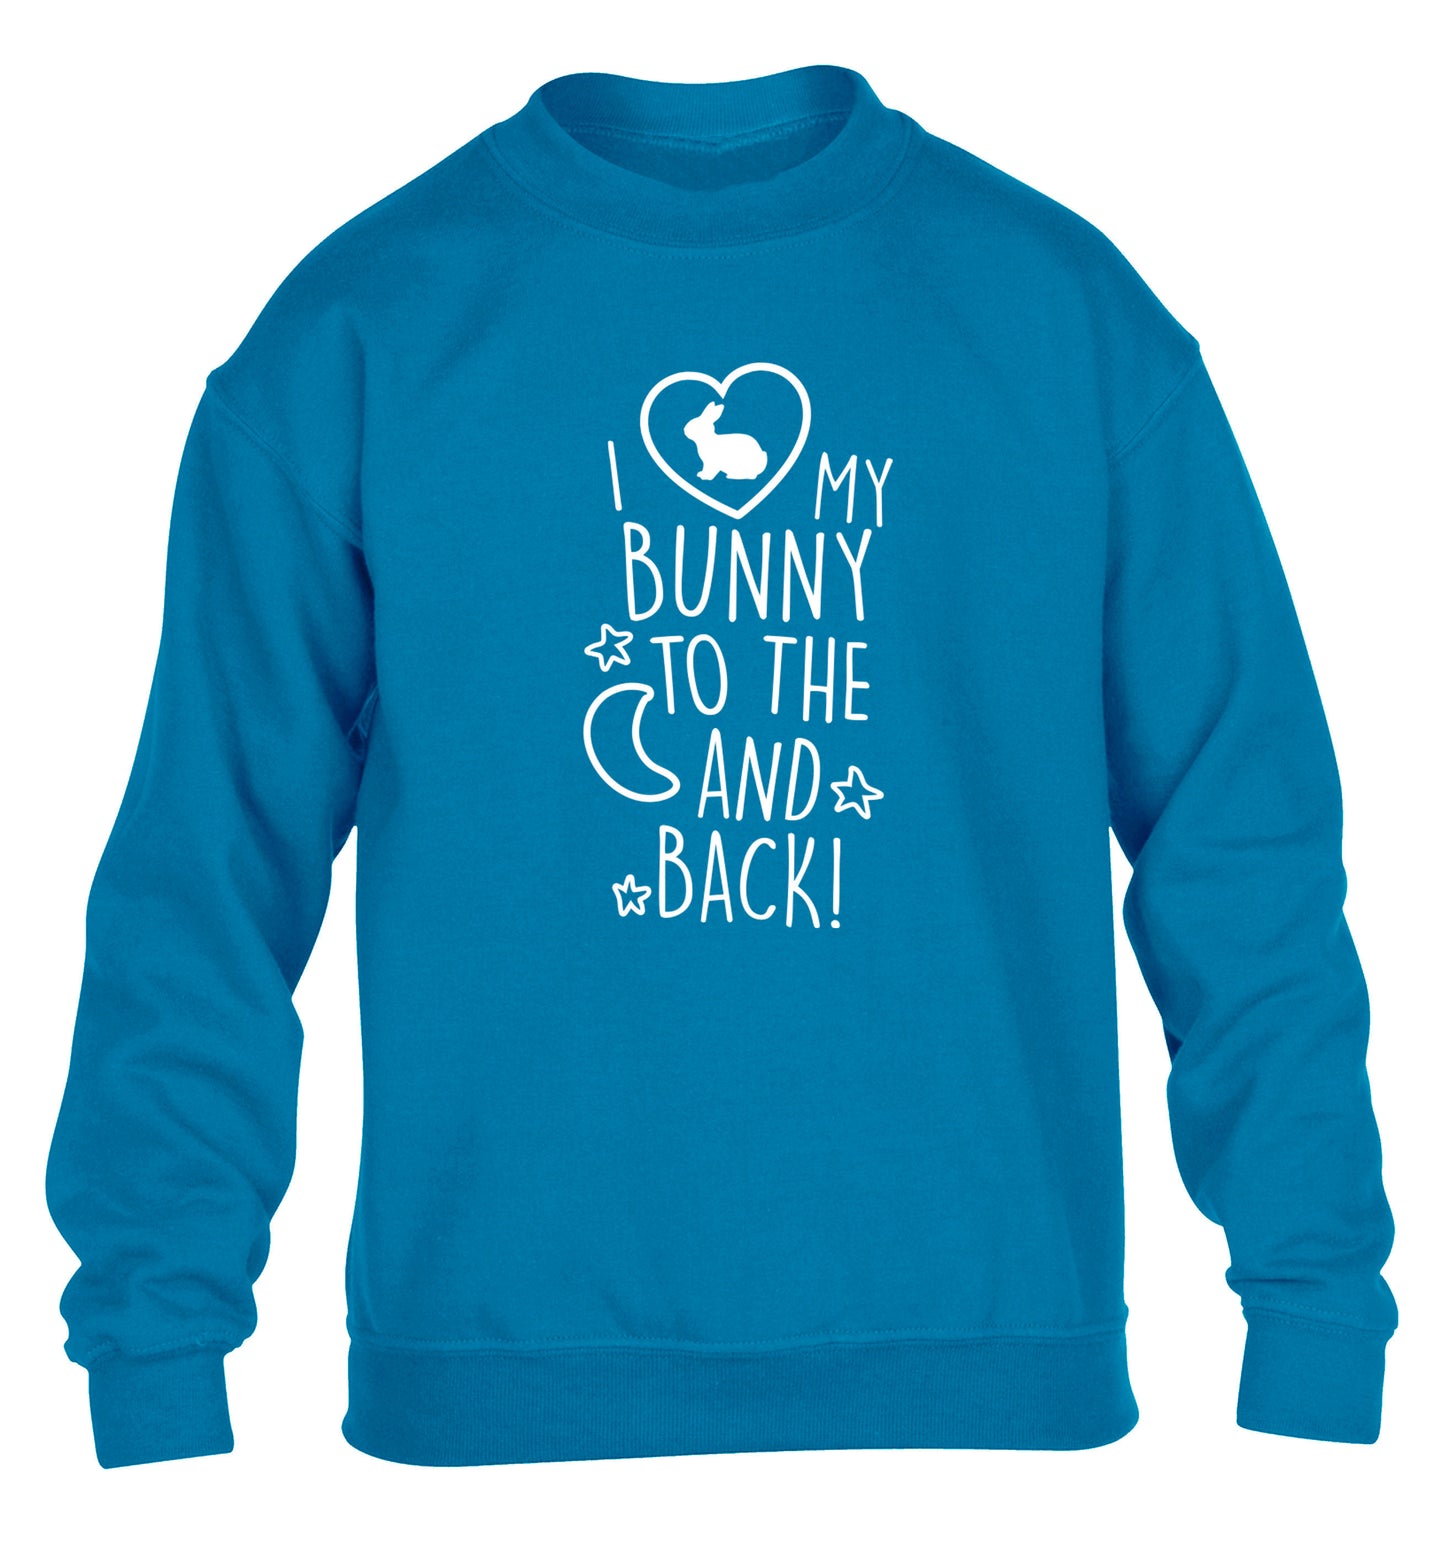 I love my bunny to the moon and back children's blue  sweater 12-14 Years